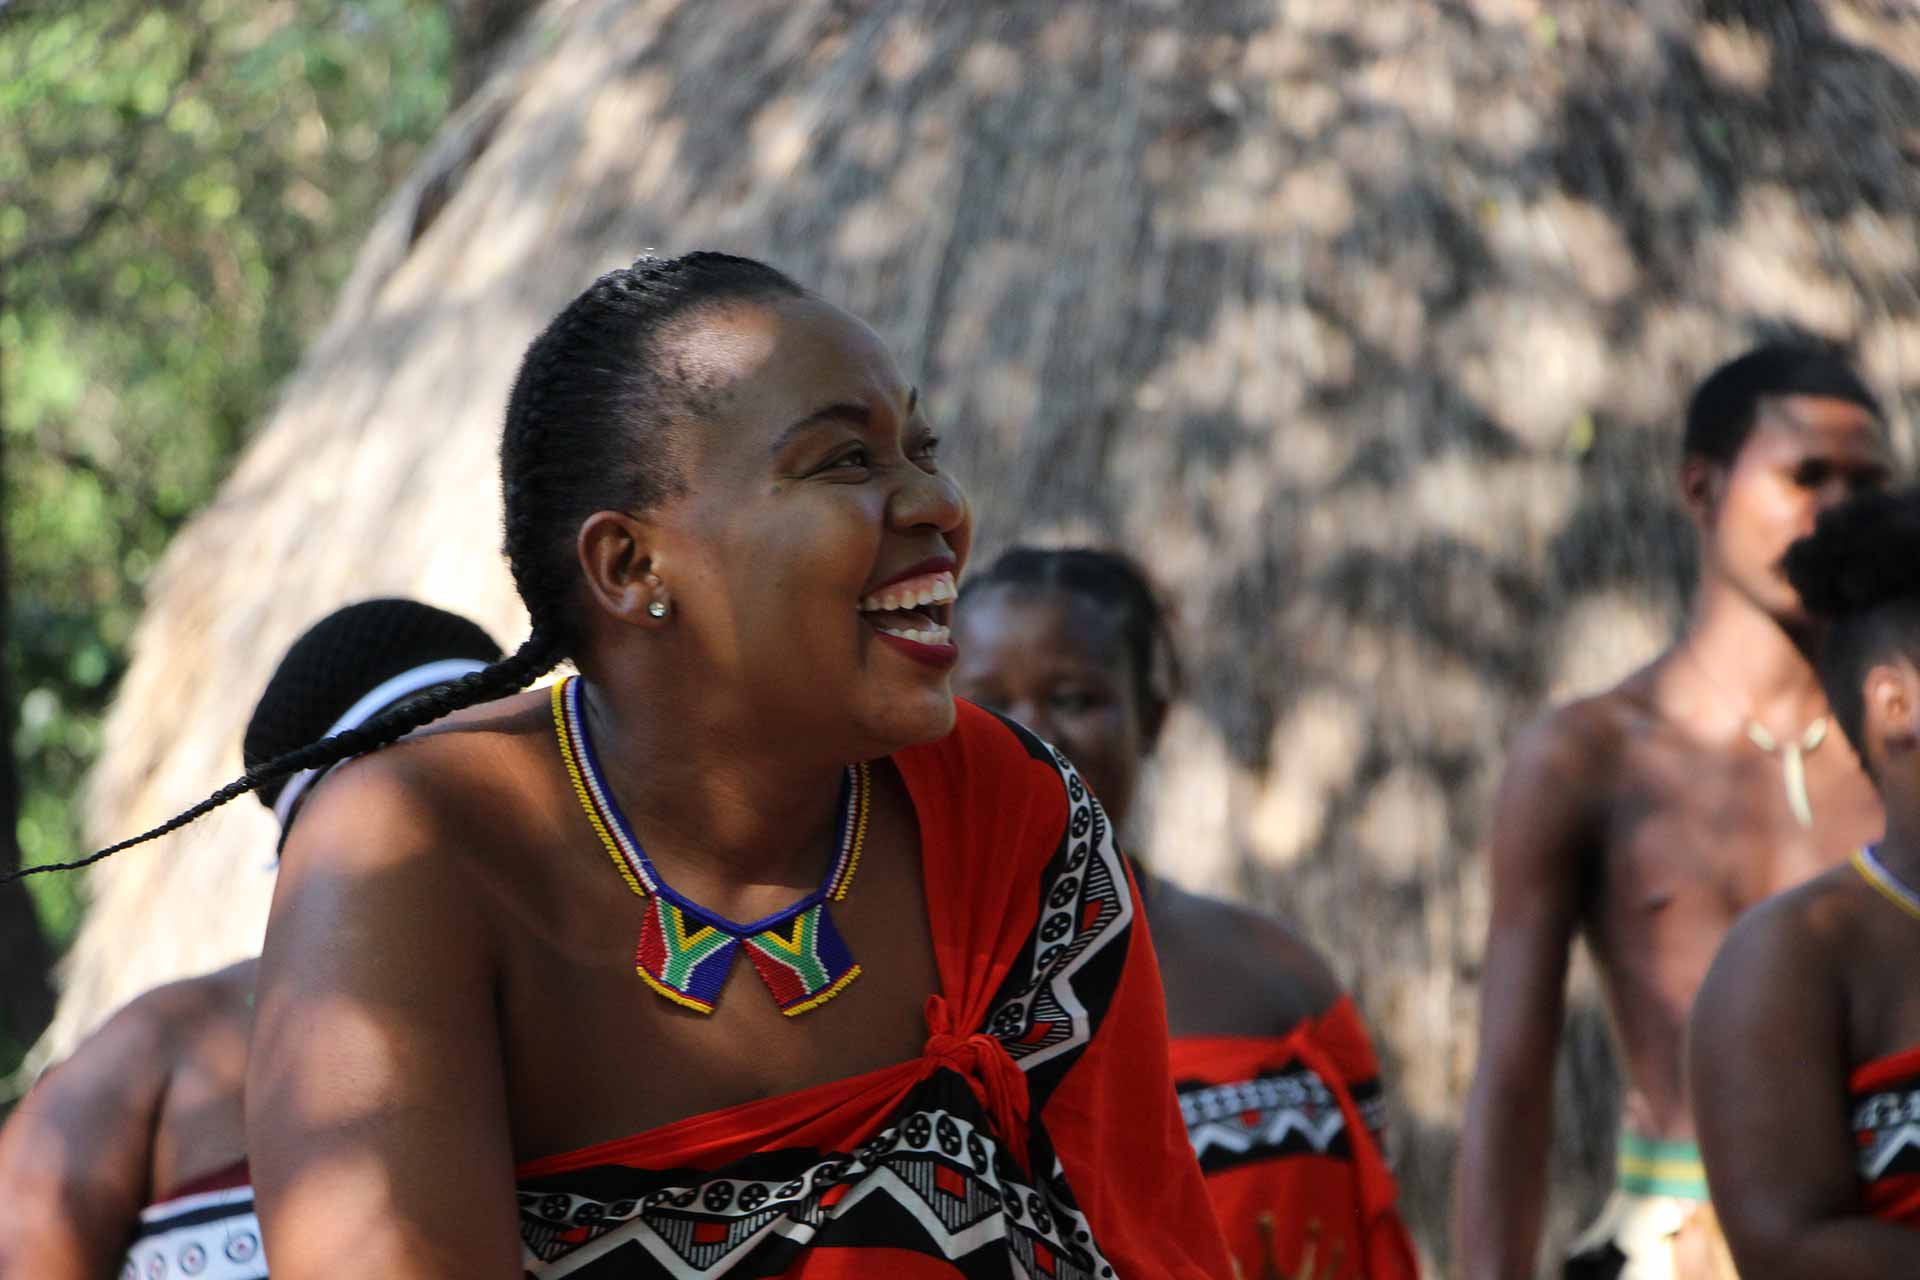 Enjoying a traditional cultural performance of song and dance on the border between South Africa and Eswatini.